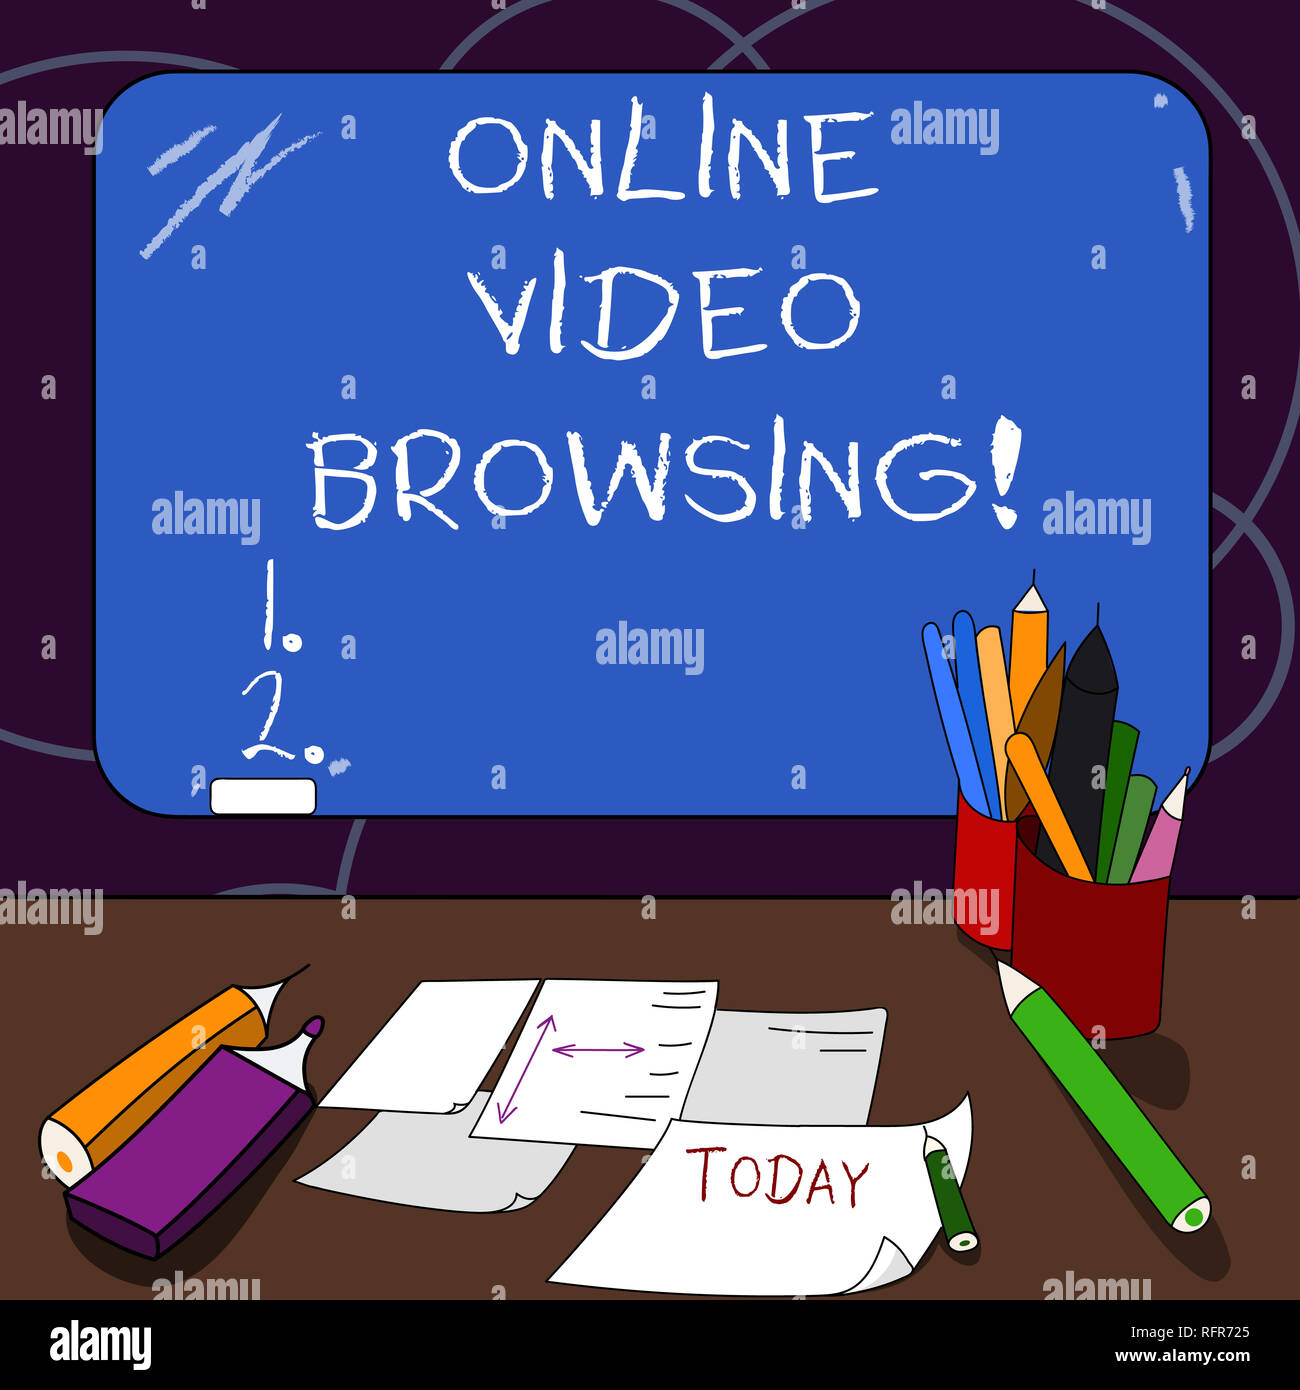 Handwriting Text Online Video Browsing Concept Meaning Interactive Process Of Skimming Through Video Content Mounted Blank Color Blackboard With Chal Stock Photo Alamy